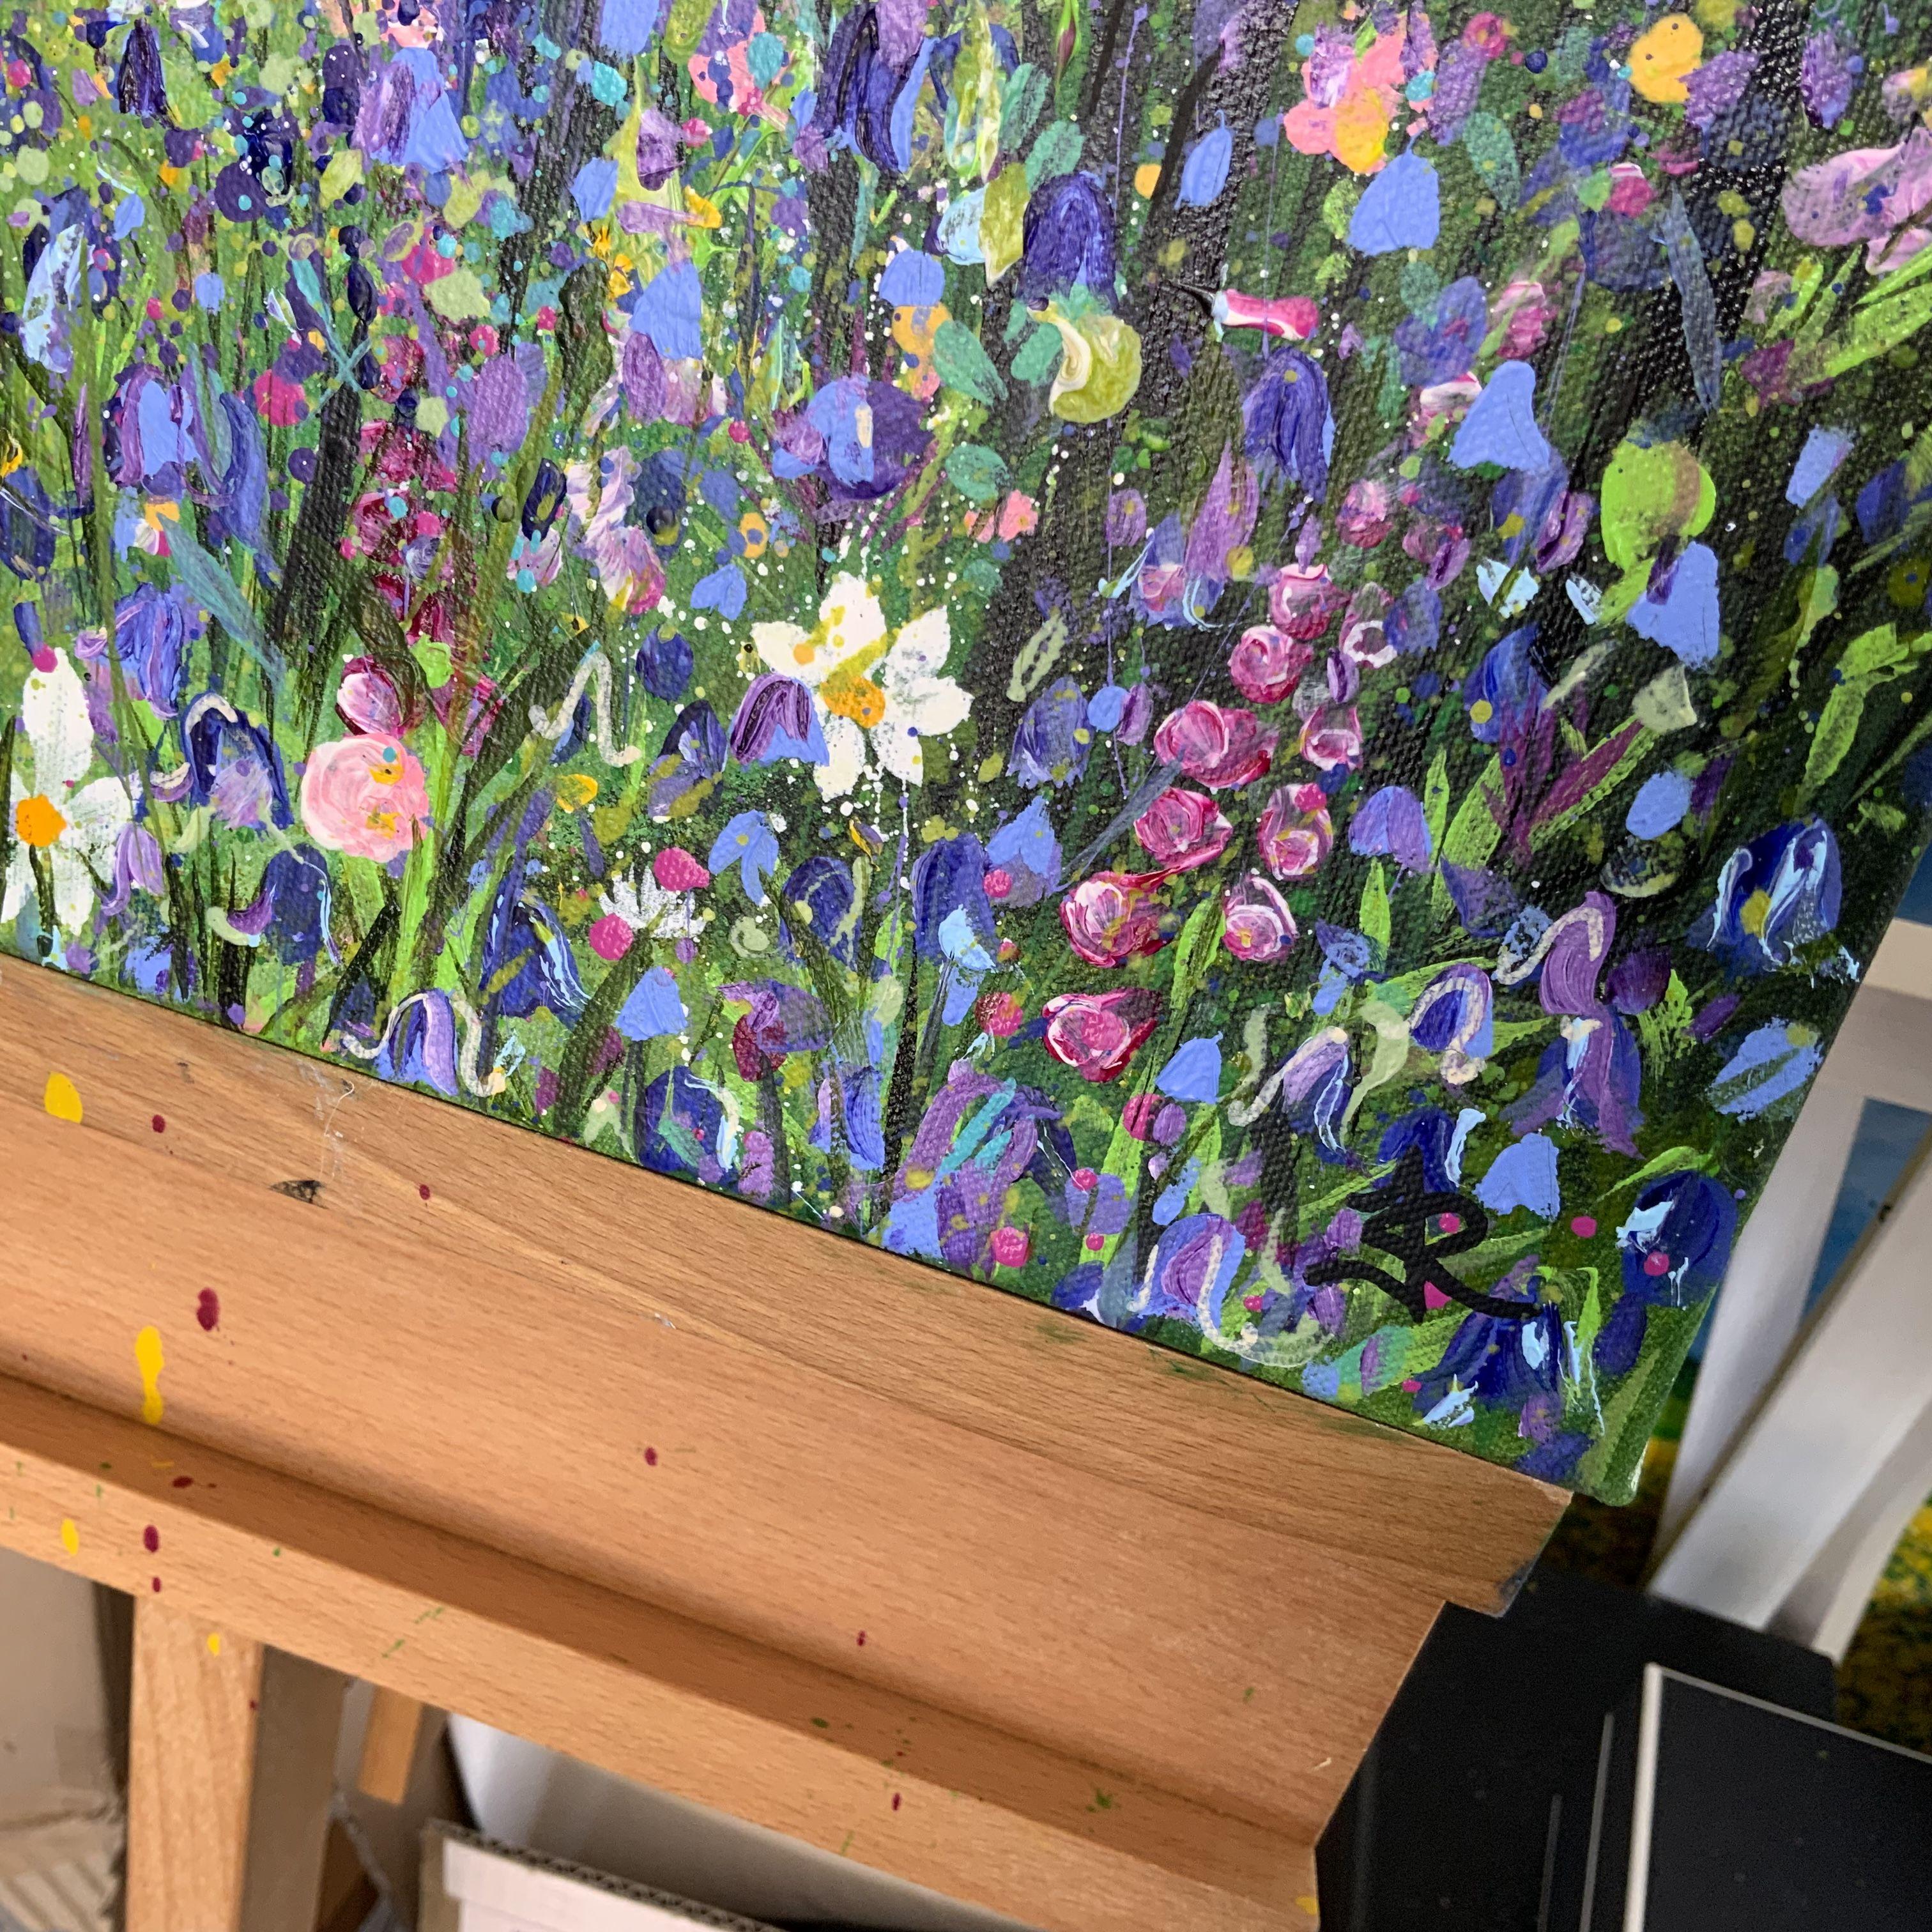 A colourful woodland retreat, a hideaway, a place of calm and tranquility. Sky blues fade to lush greens, sun shines through lighting a distant field. In the foreground wild flora sit together with Bluebells  creating a rainbow carpet. Inspired by